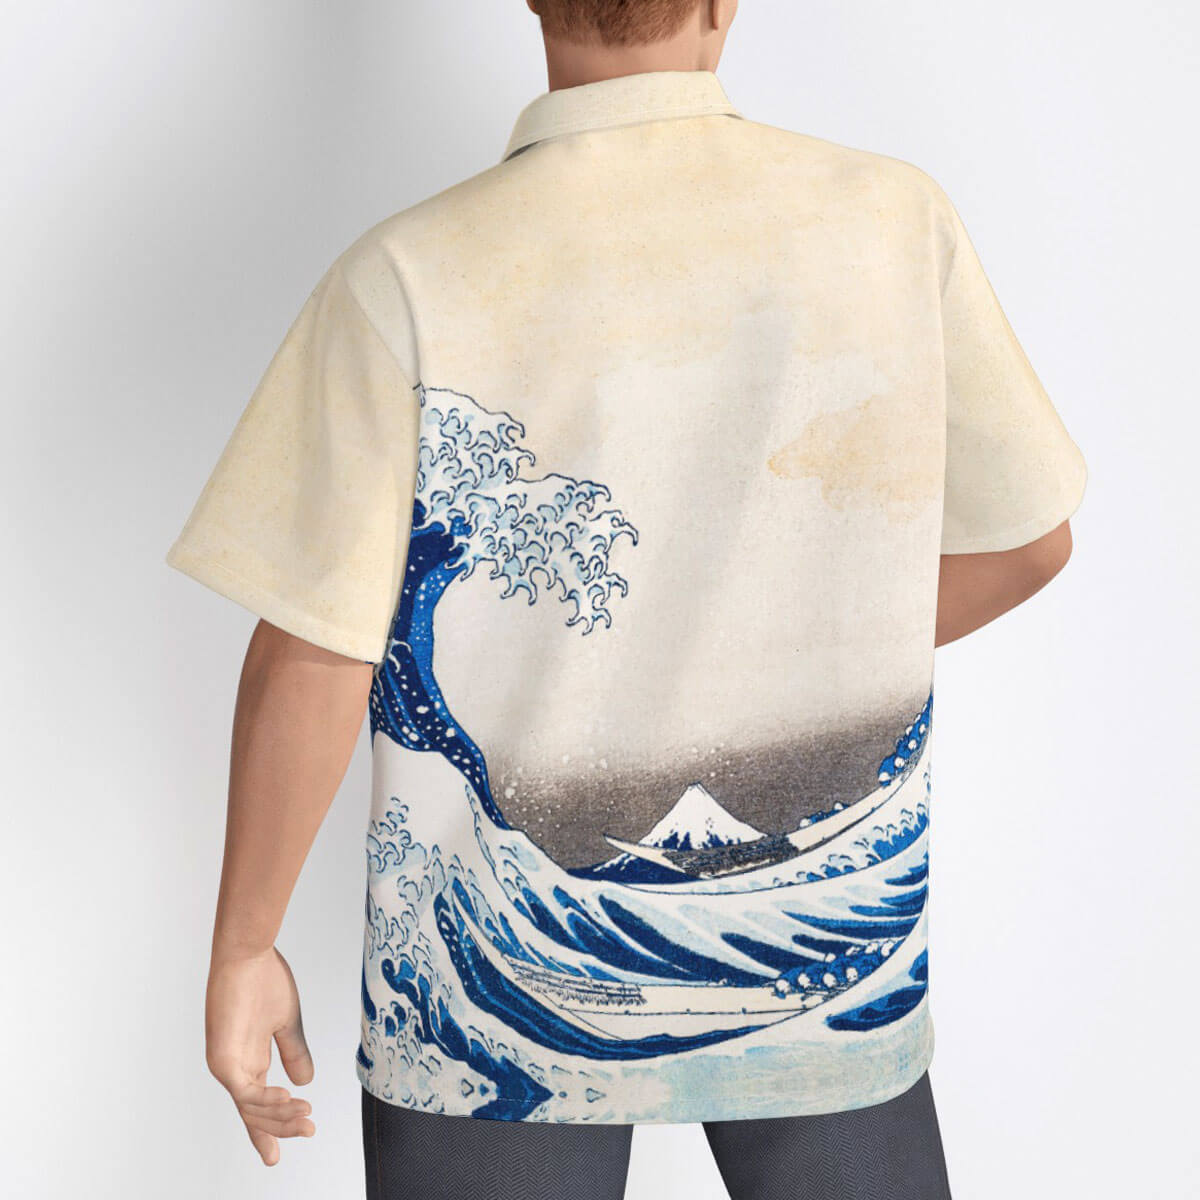 Lifestyle image of diverse group wearing The Great Wave Hokusai shirts